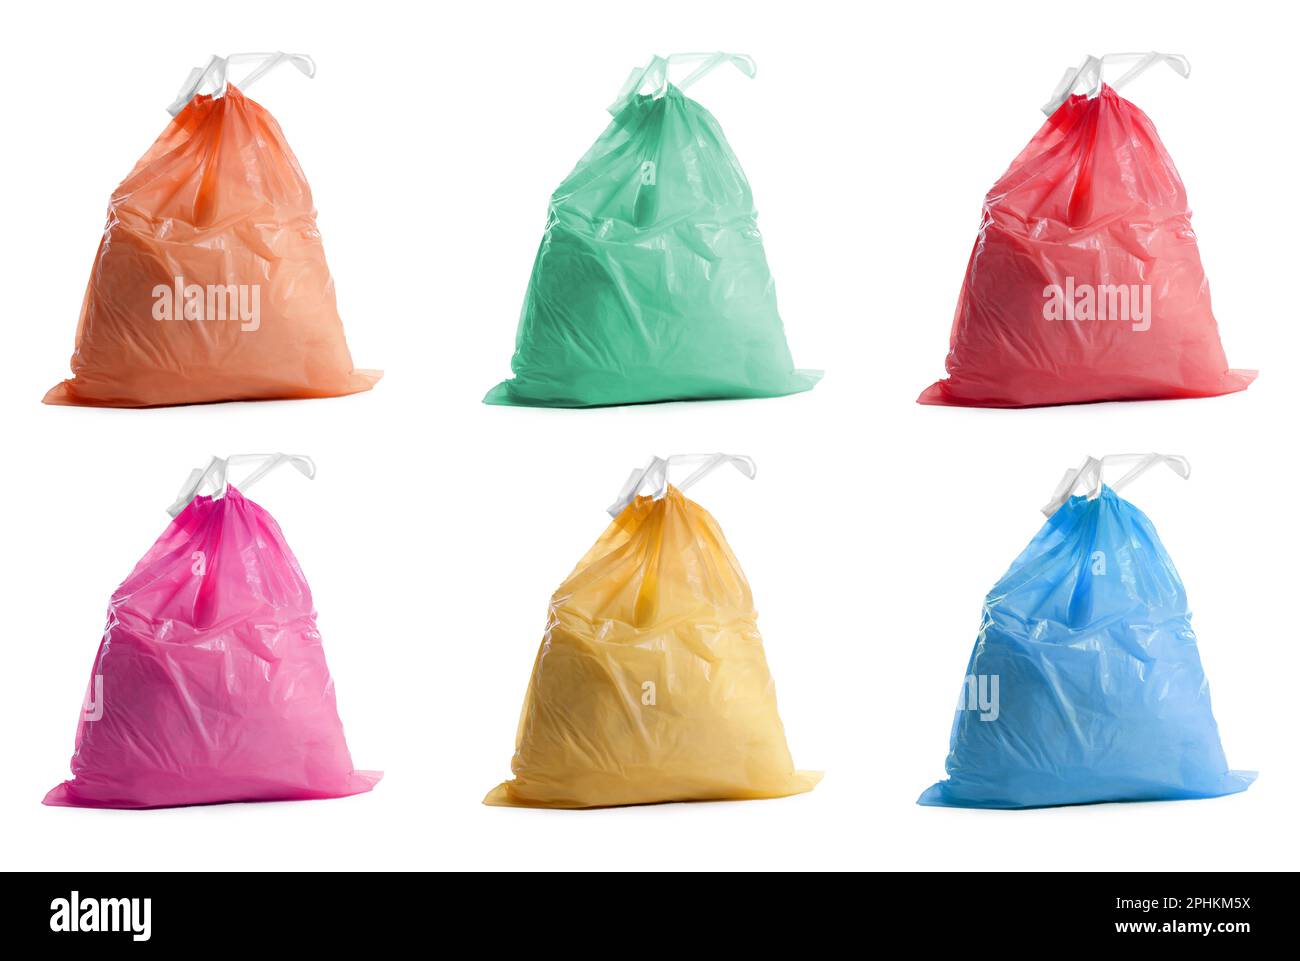 https://c8.alamy.com/comp/2PHKM5X/set-with-different-trash-bags-full-of-garbage-on-white-background-2PHKM5X.jpg